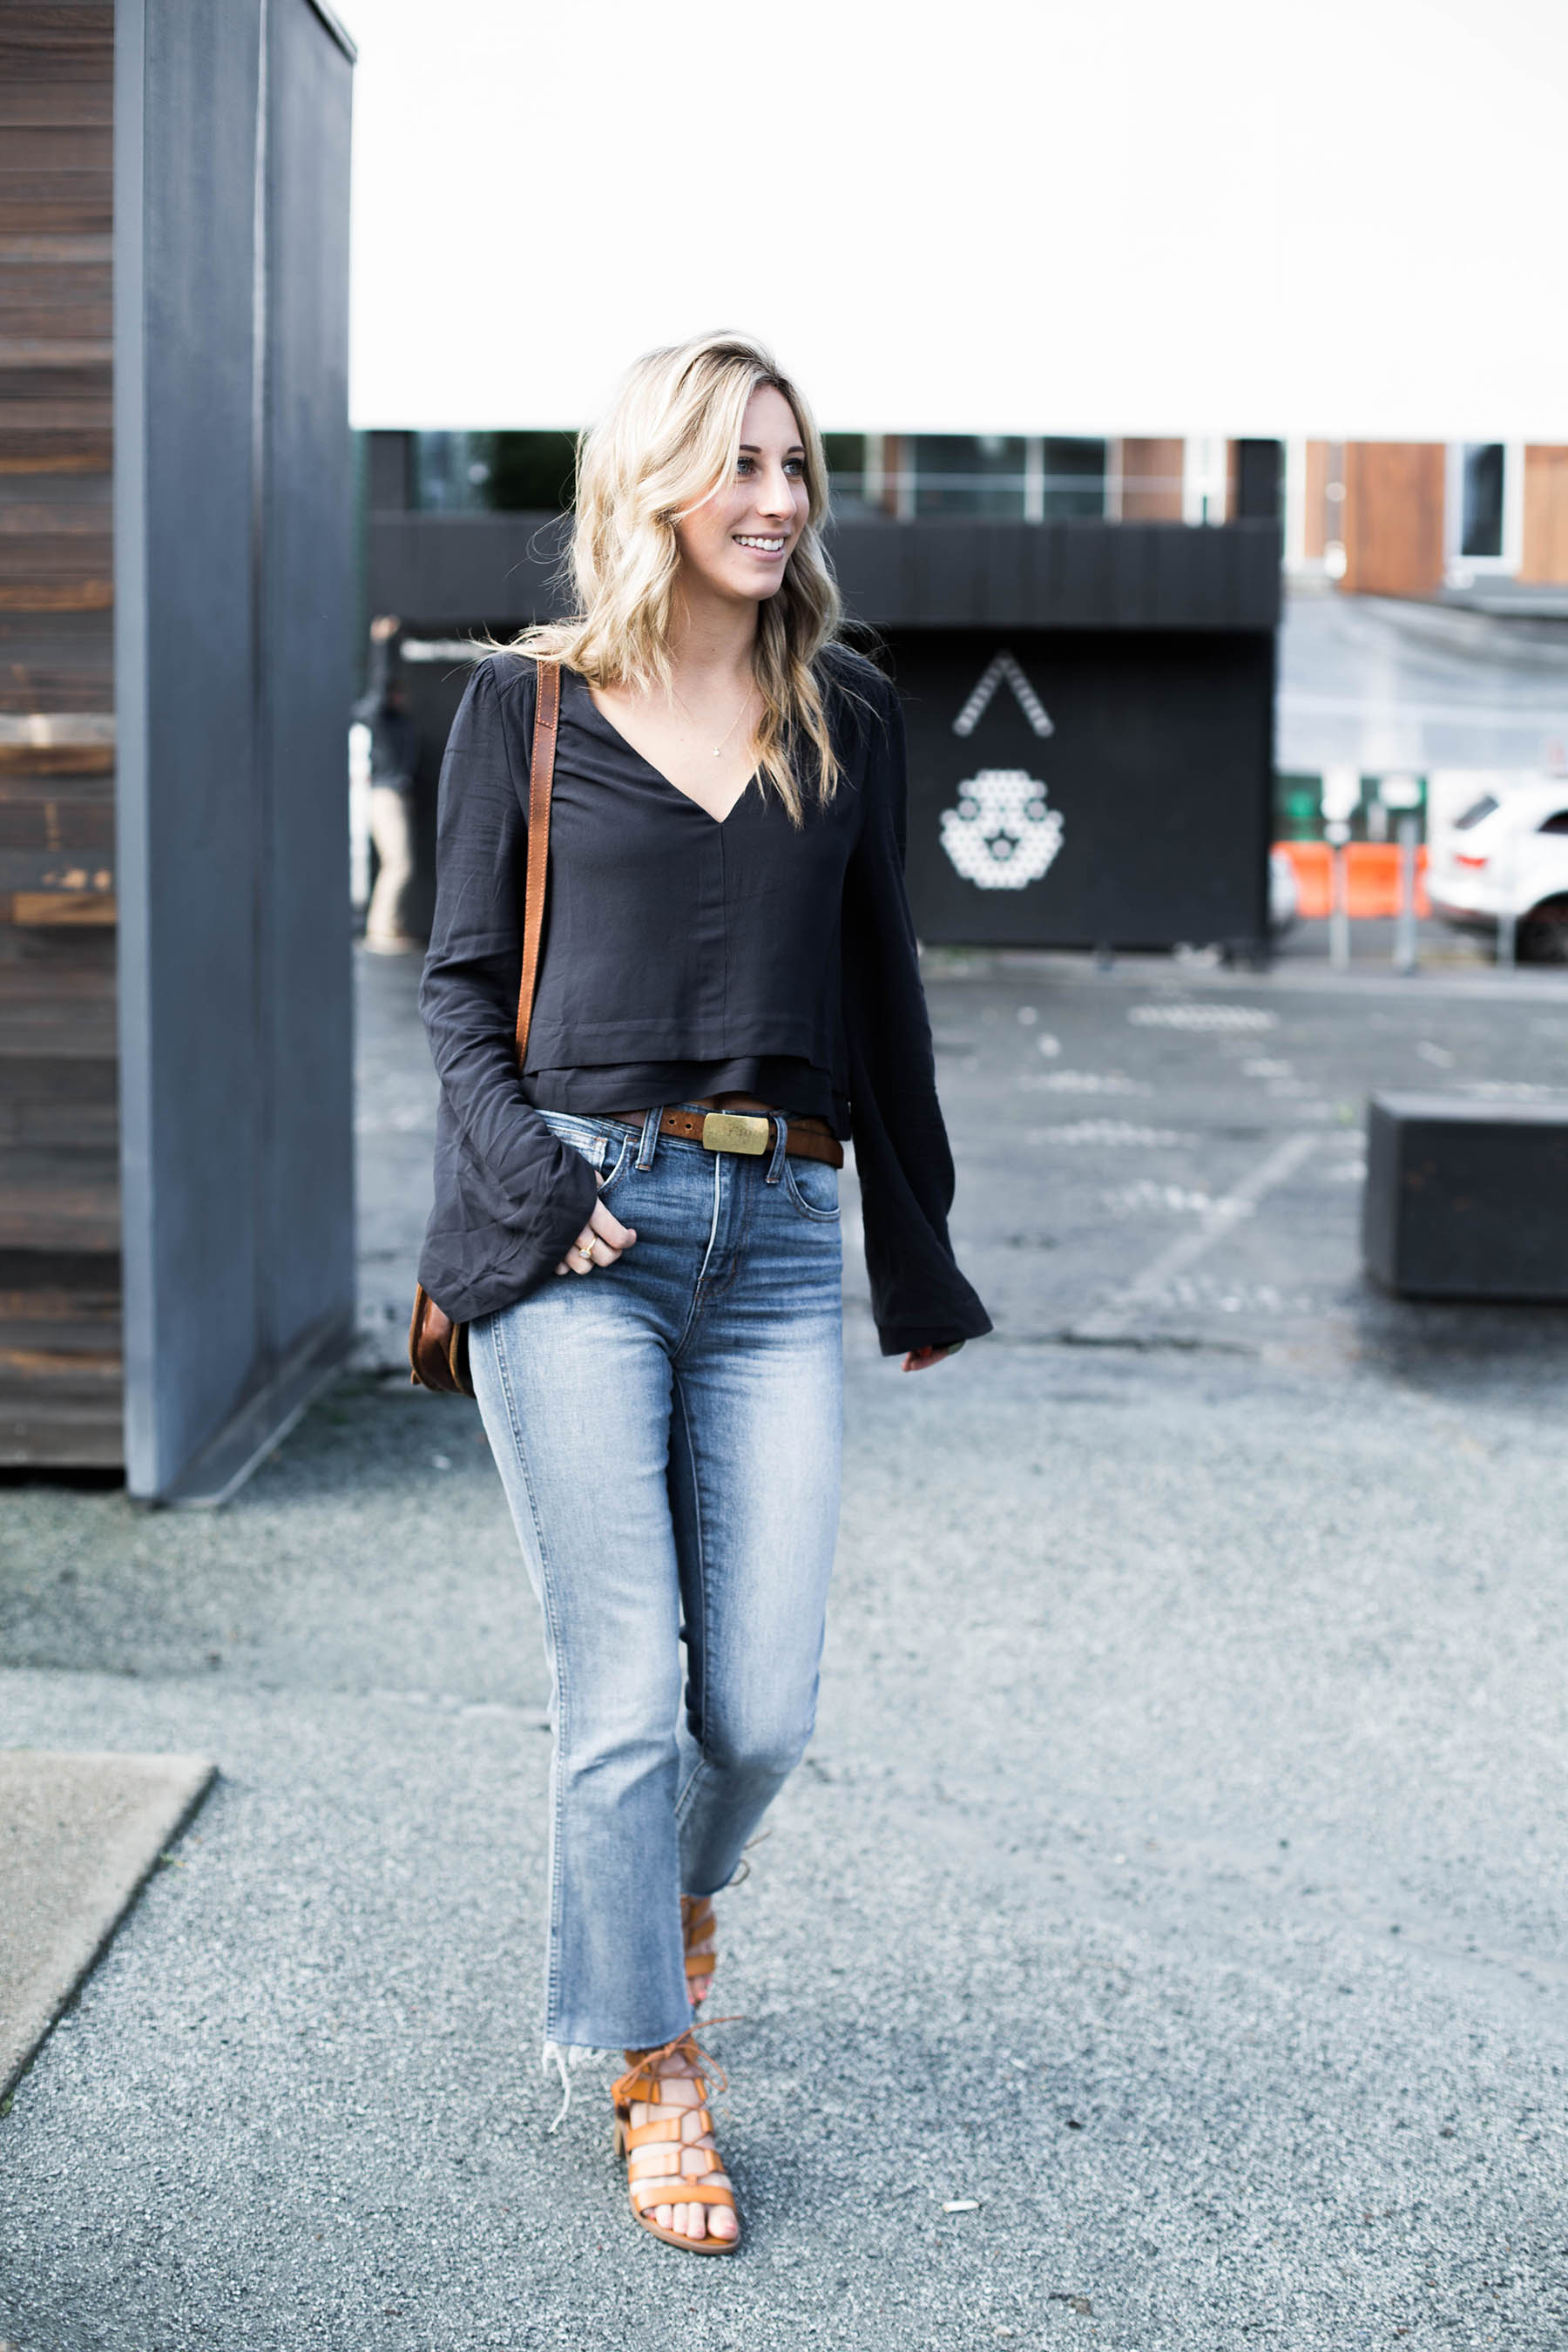 Amanda Holstein in spring outfit of Free People top, Madewell jeans, Old Navy sandals